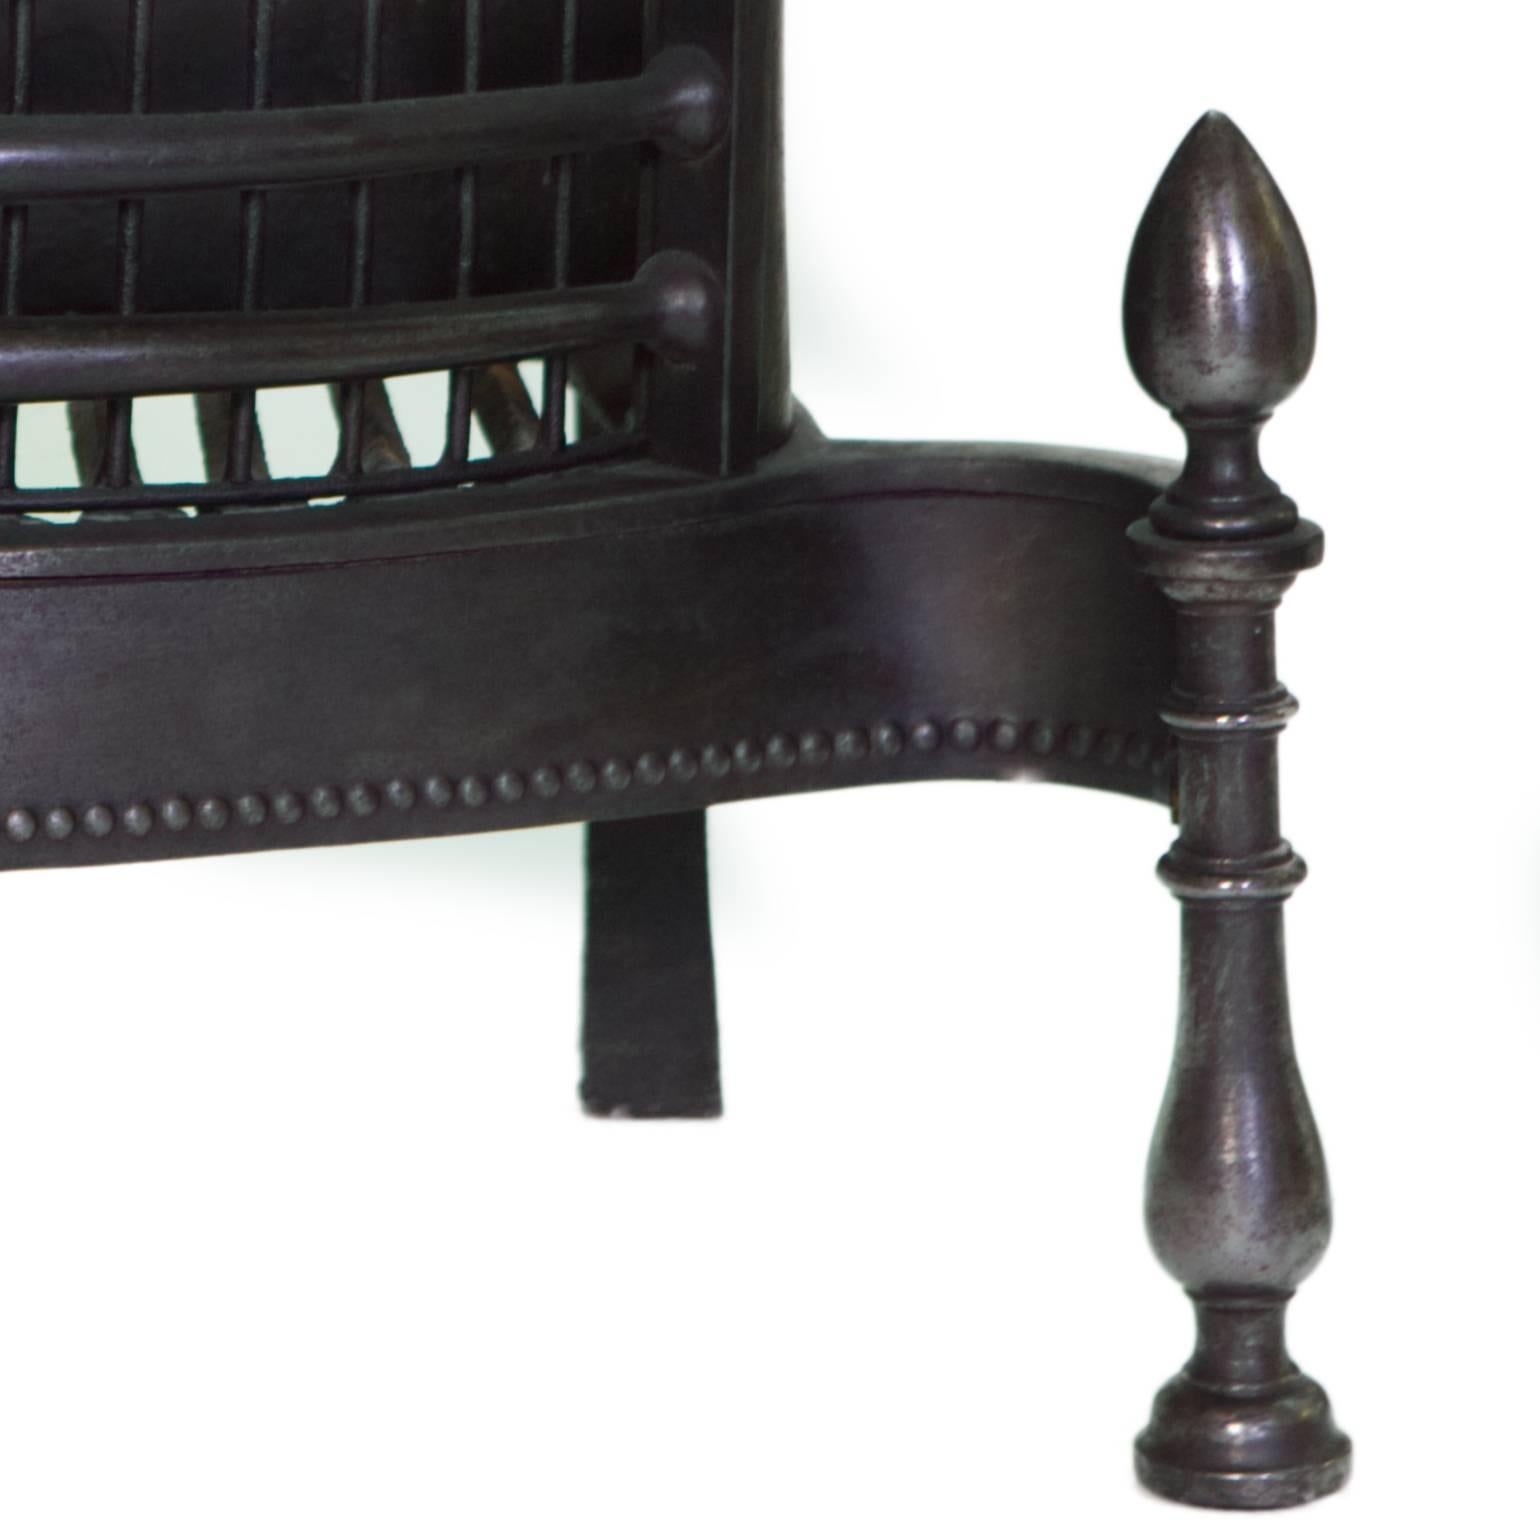 A very fine late 18th century Classic Georgian black cast iron fire basket.
With simple detail to the fire back, steel apron and cast finials.
Salvaged and restored from a London Town House.  

Measure: Back width 19 1/2